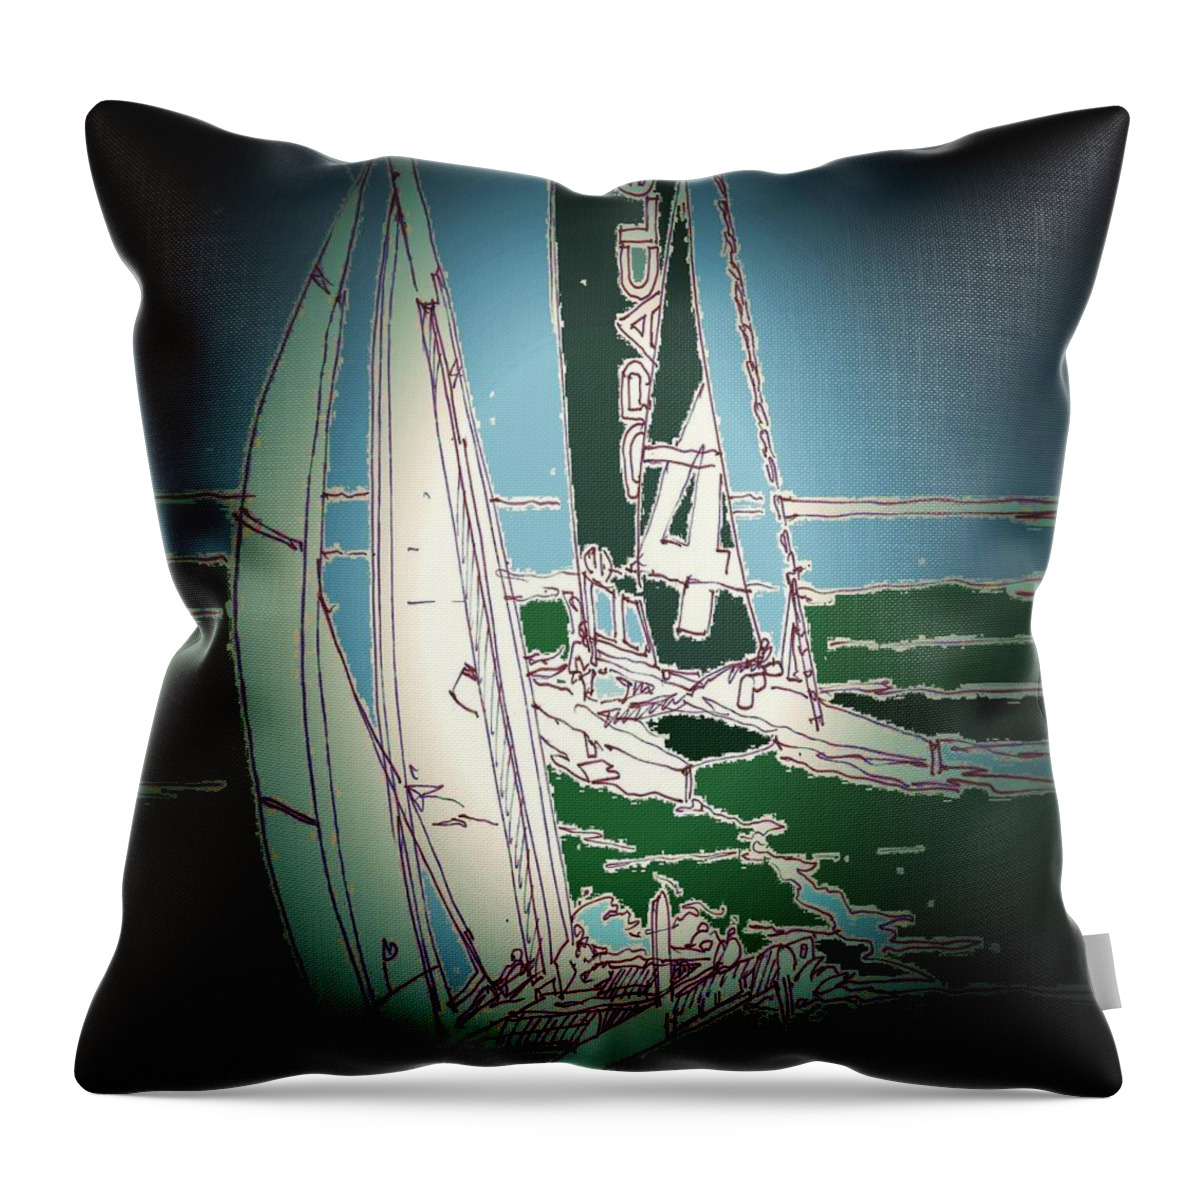 Sailing San Francisco Bay Oracle Races Throw Pillow featuring the painting San Francisco Races by Andrew Drozdowicz